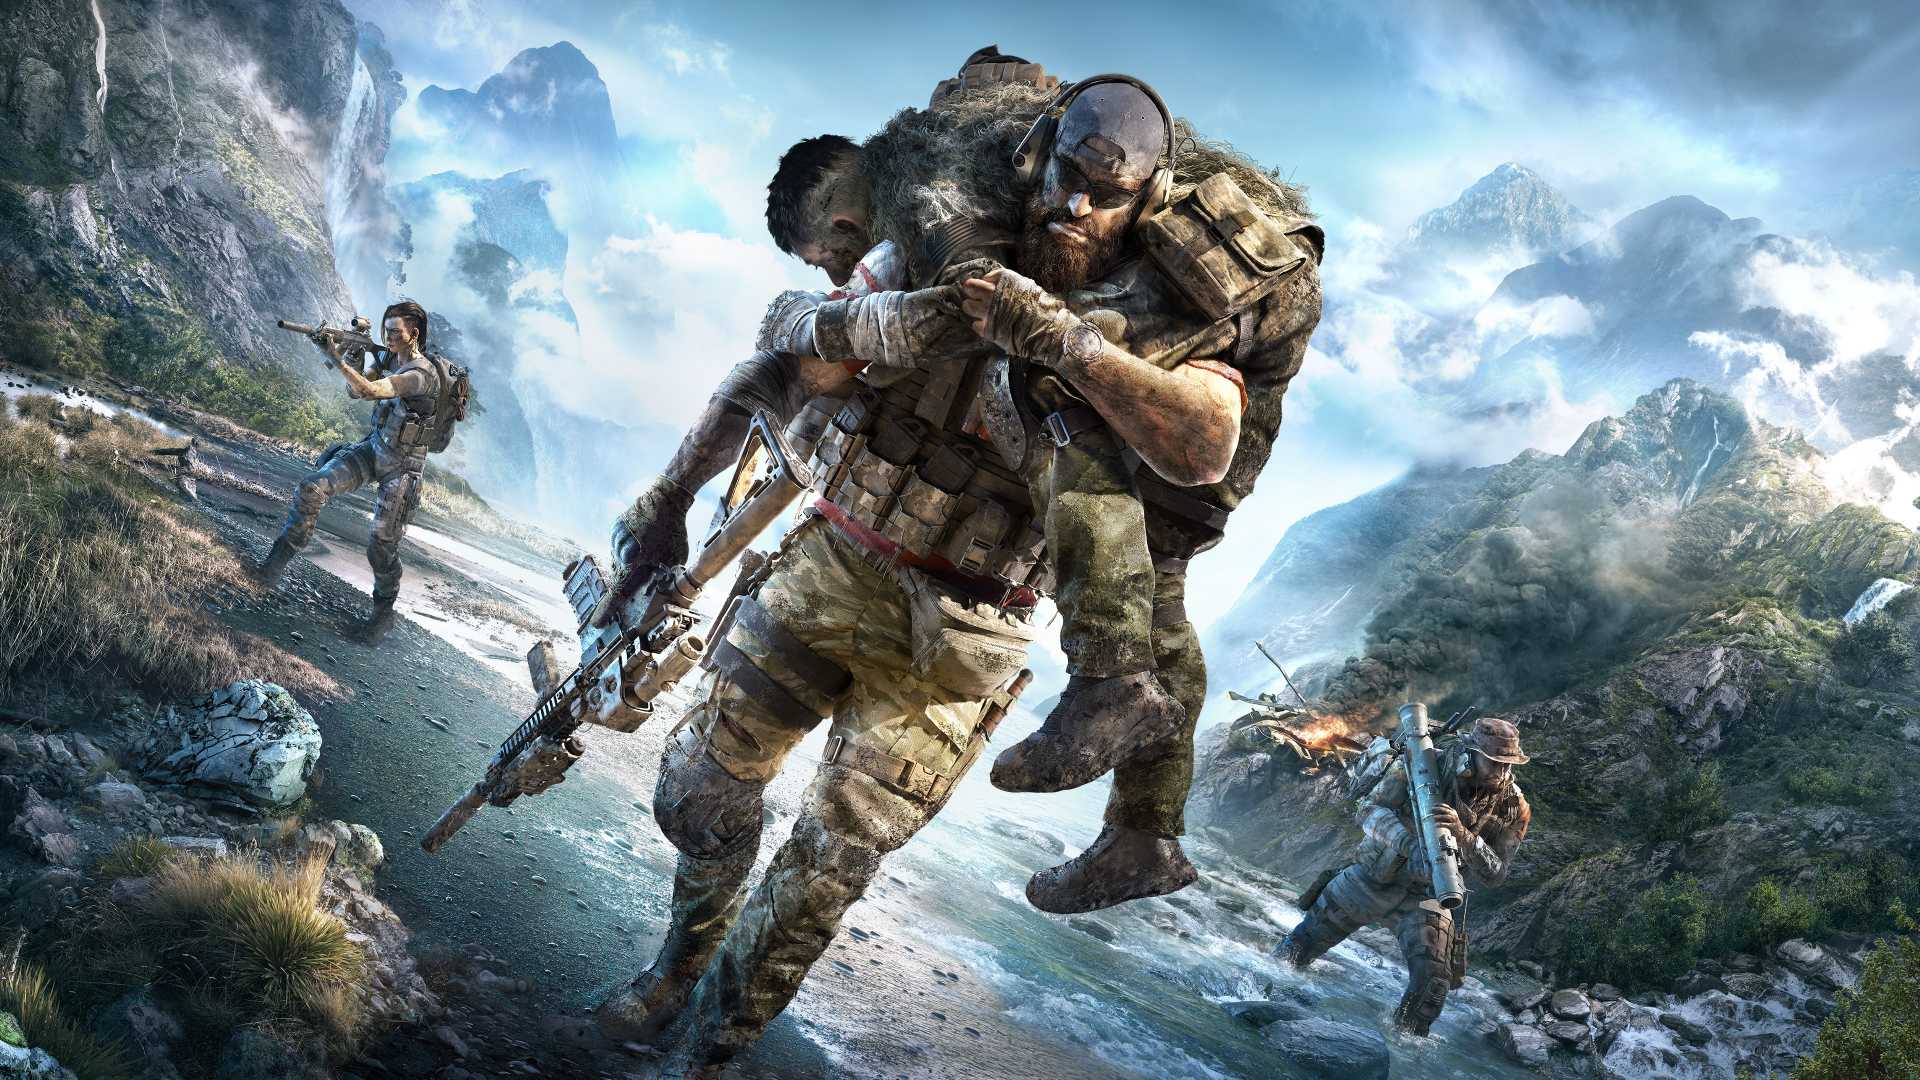 Tom Clancy's Ghost Recon breakpoint ps4. Диск на плейстейшен 4 Ghost Recon. Диск на плейстейшен 4 Ghost Recon Break point. Tom Clancy’s Ghost Recon breakpoint обложка. Tom clancy s на андроид